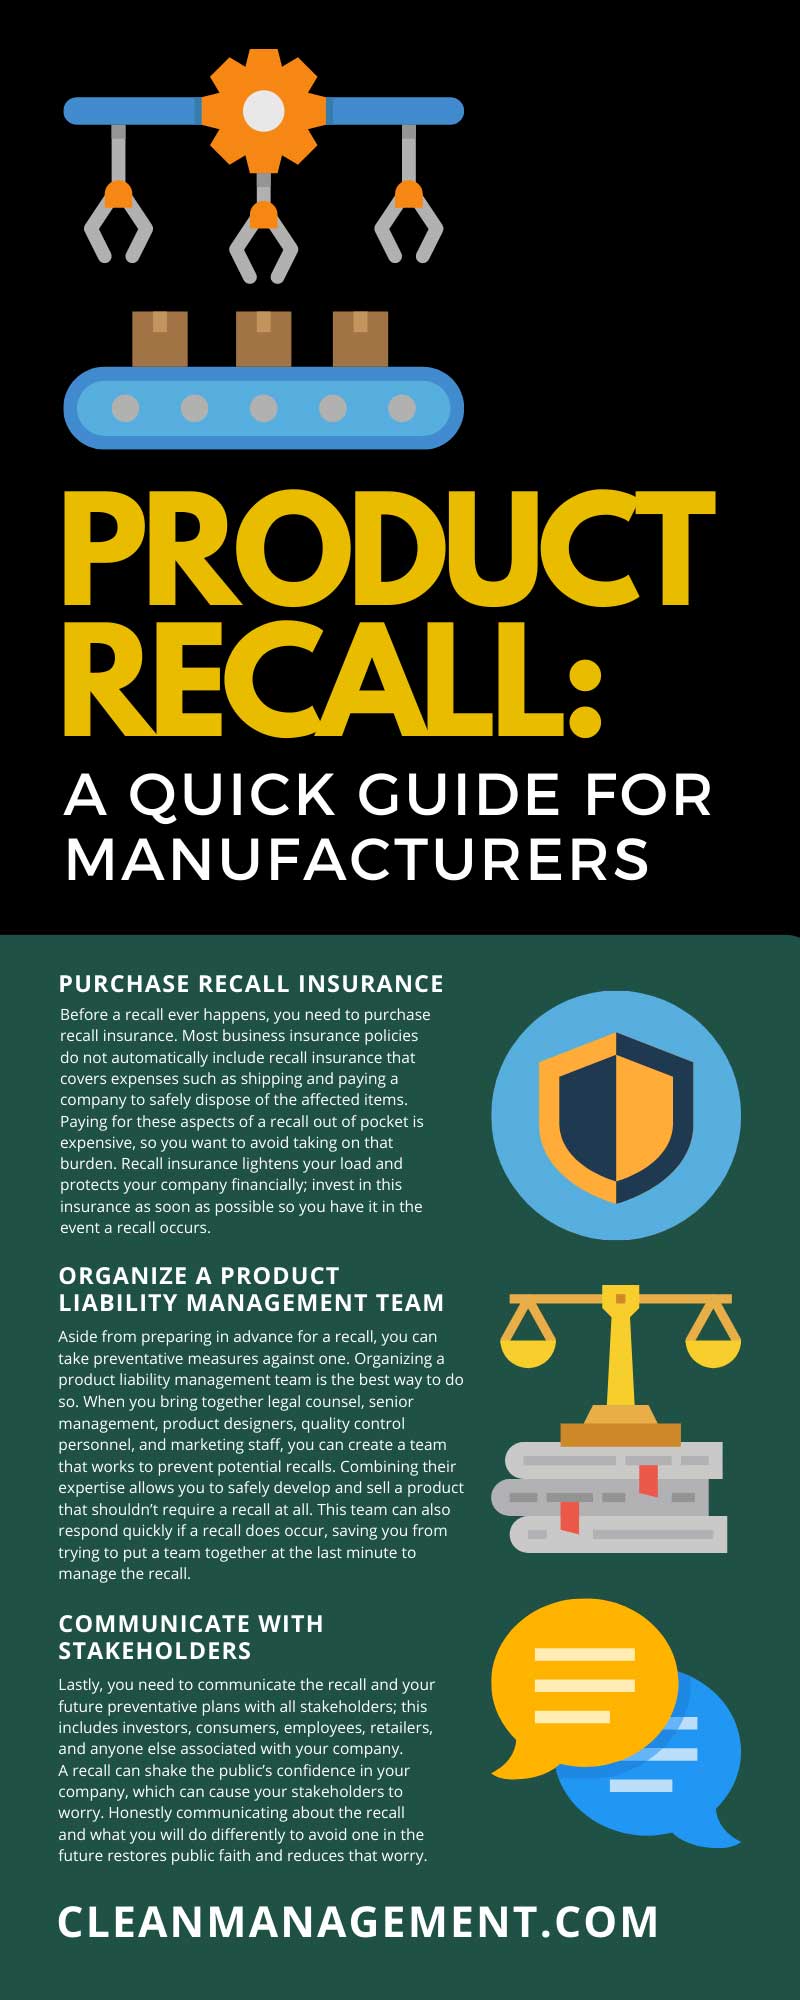 Product Recall: A Quick Guide for Manufacturers